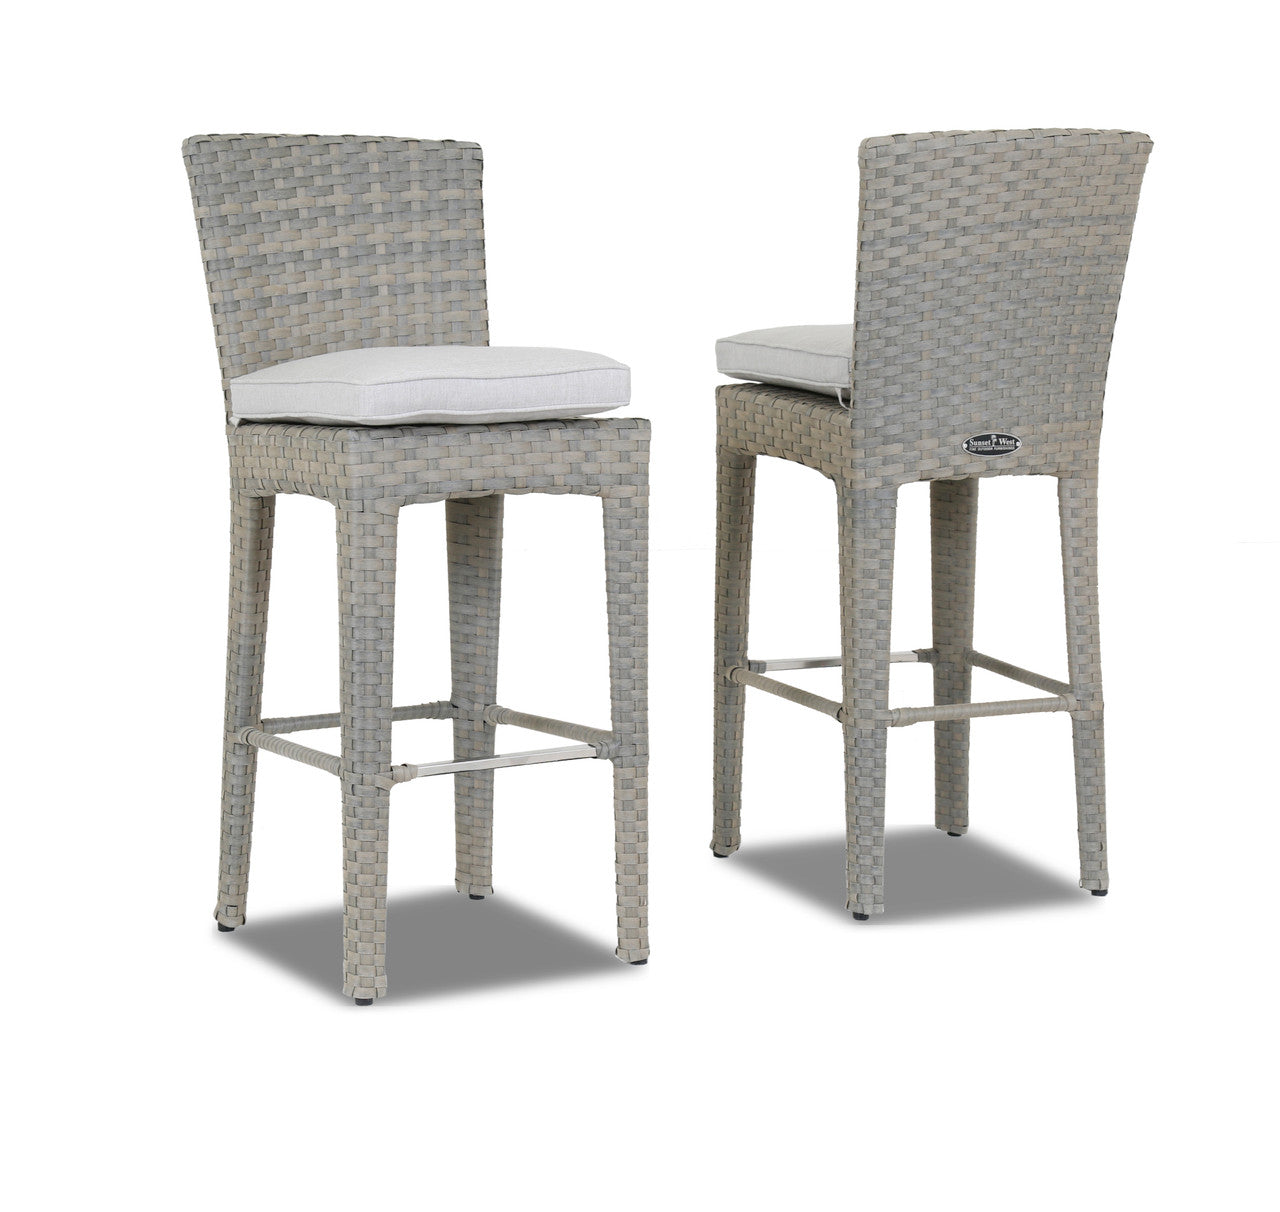 Replacement Cushions for Sunset West Majorca Bar stool